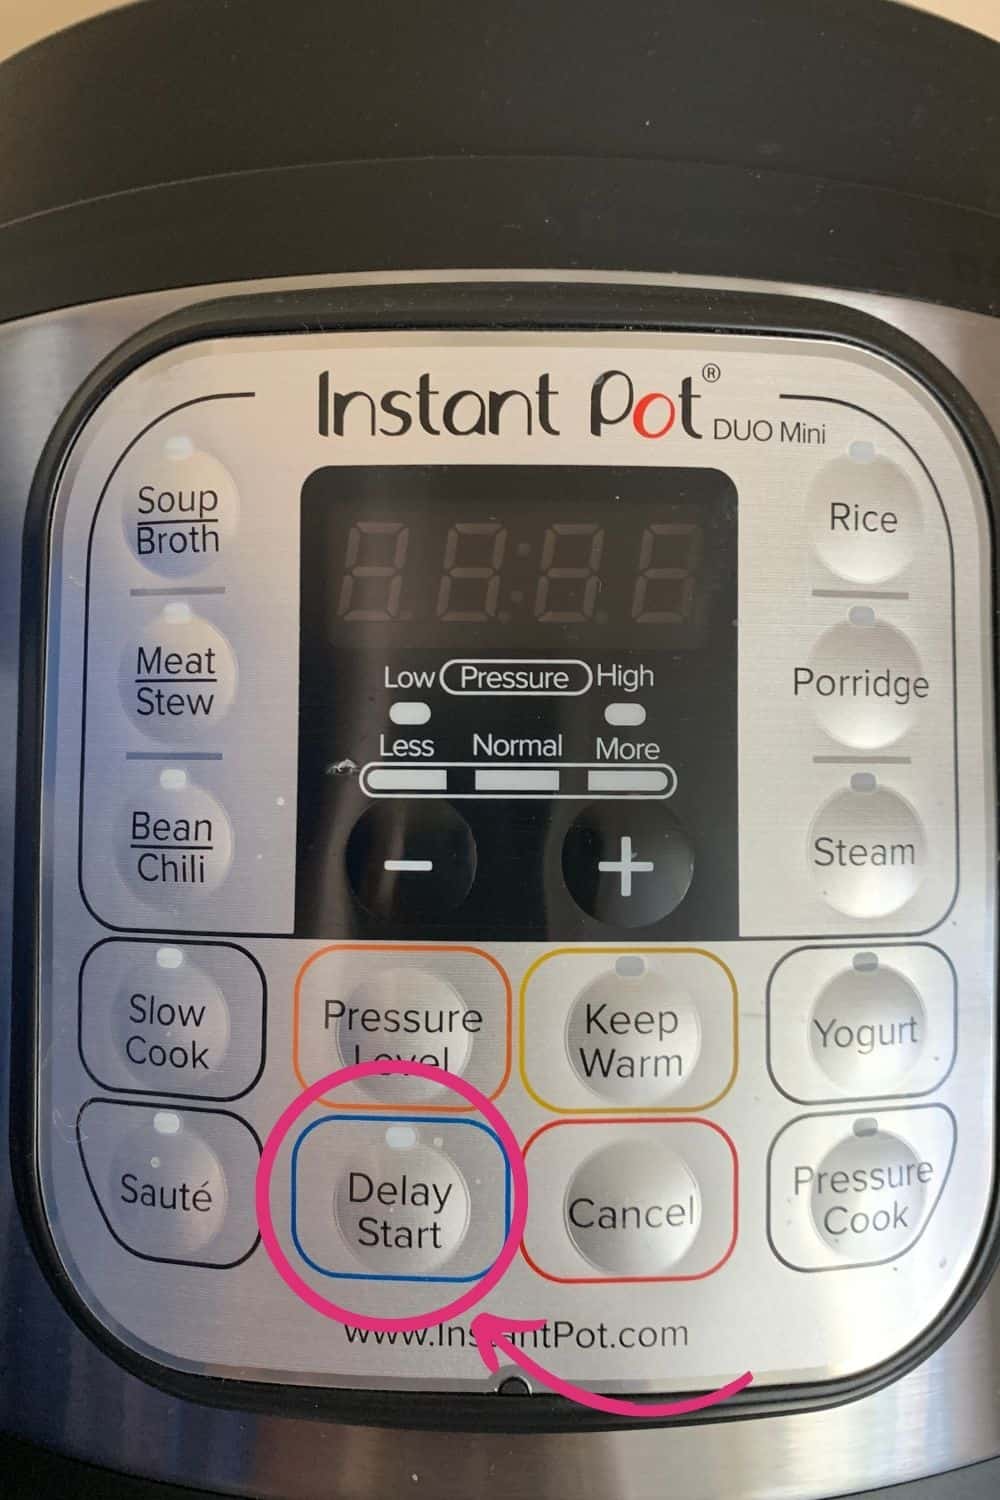 close-up of the control panel of an Instant Pot that does not have a timer button, but instead has a delay start button